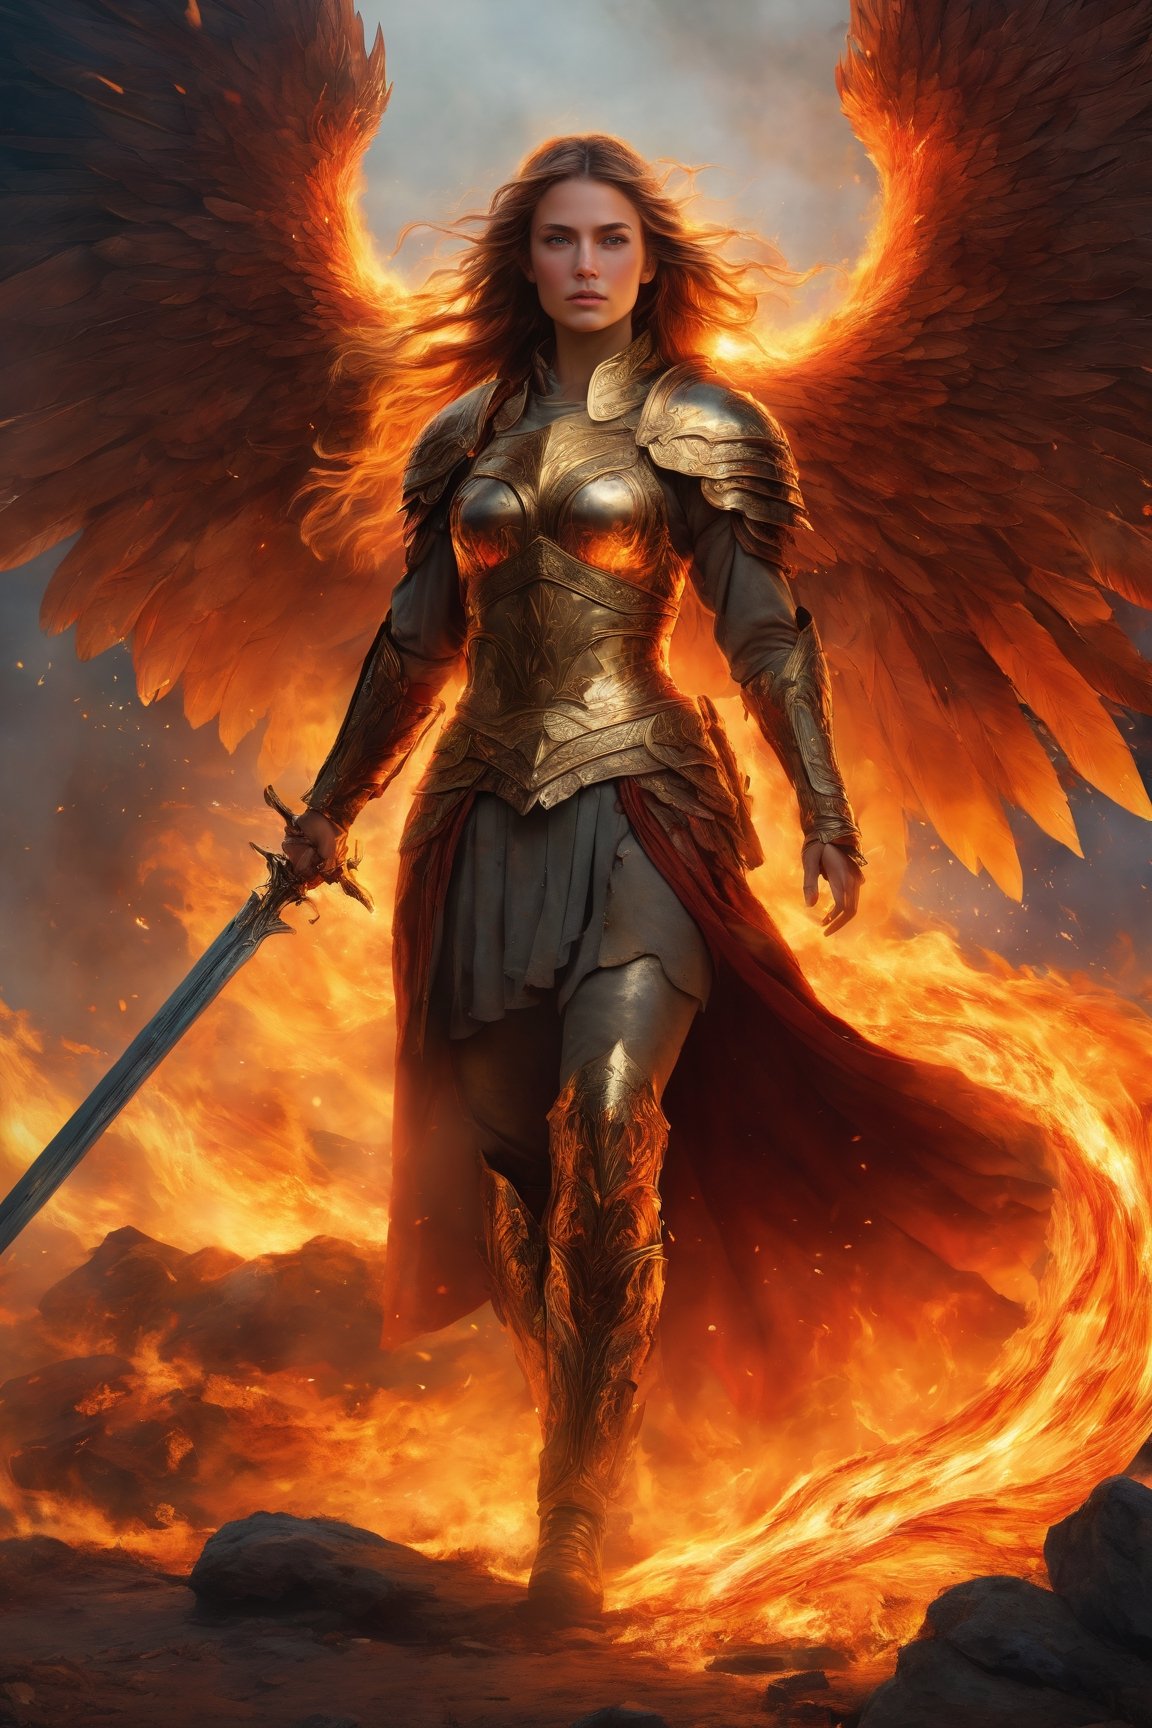 A (high-quality, 8K, masterpiece) portrait of a fierce warrior princess standing tall on a desolate battlefield. She wears battle-scarred armor that tells the story of countless battles, and her commanding gaze exudes strength and determination. By her side, a fiery phoenix companion soars amidst (smoldering flames:1.3), casting an ethereal glow on the scene. The intense color palette, inspired by Gustave Doré and Romanticism, adds depth and emotion to this epic portrayal of heroism.